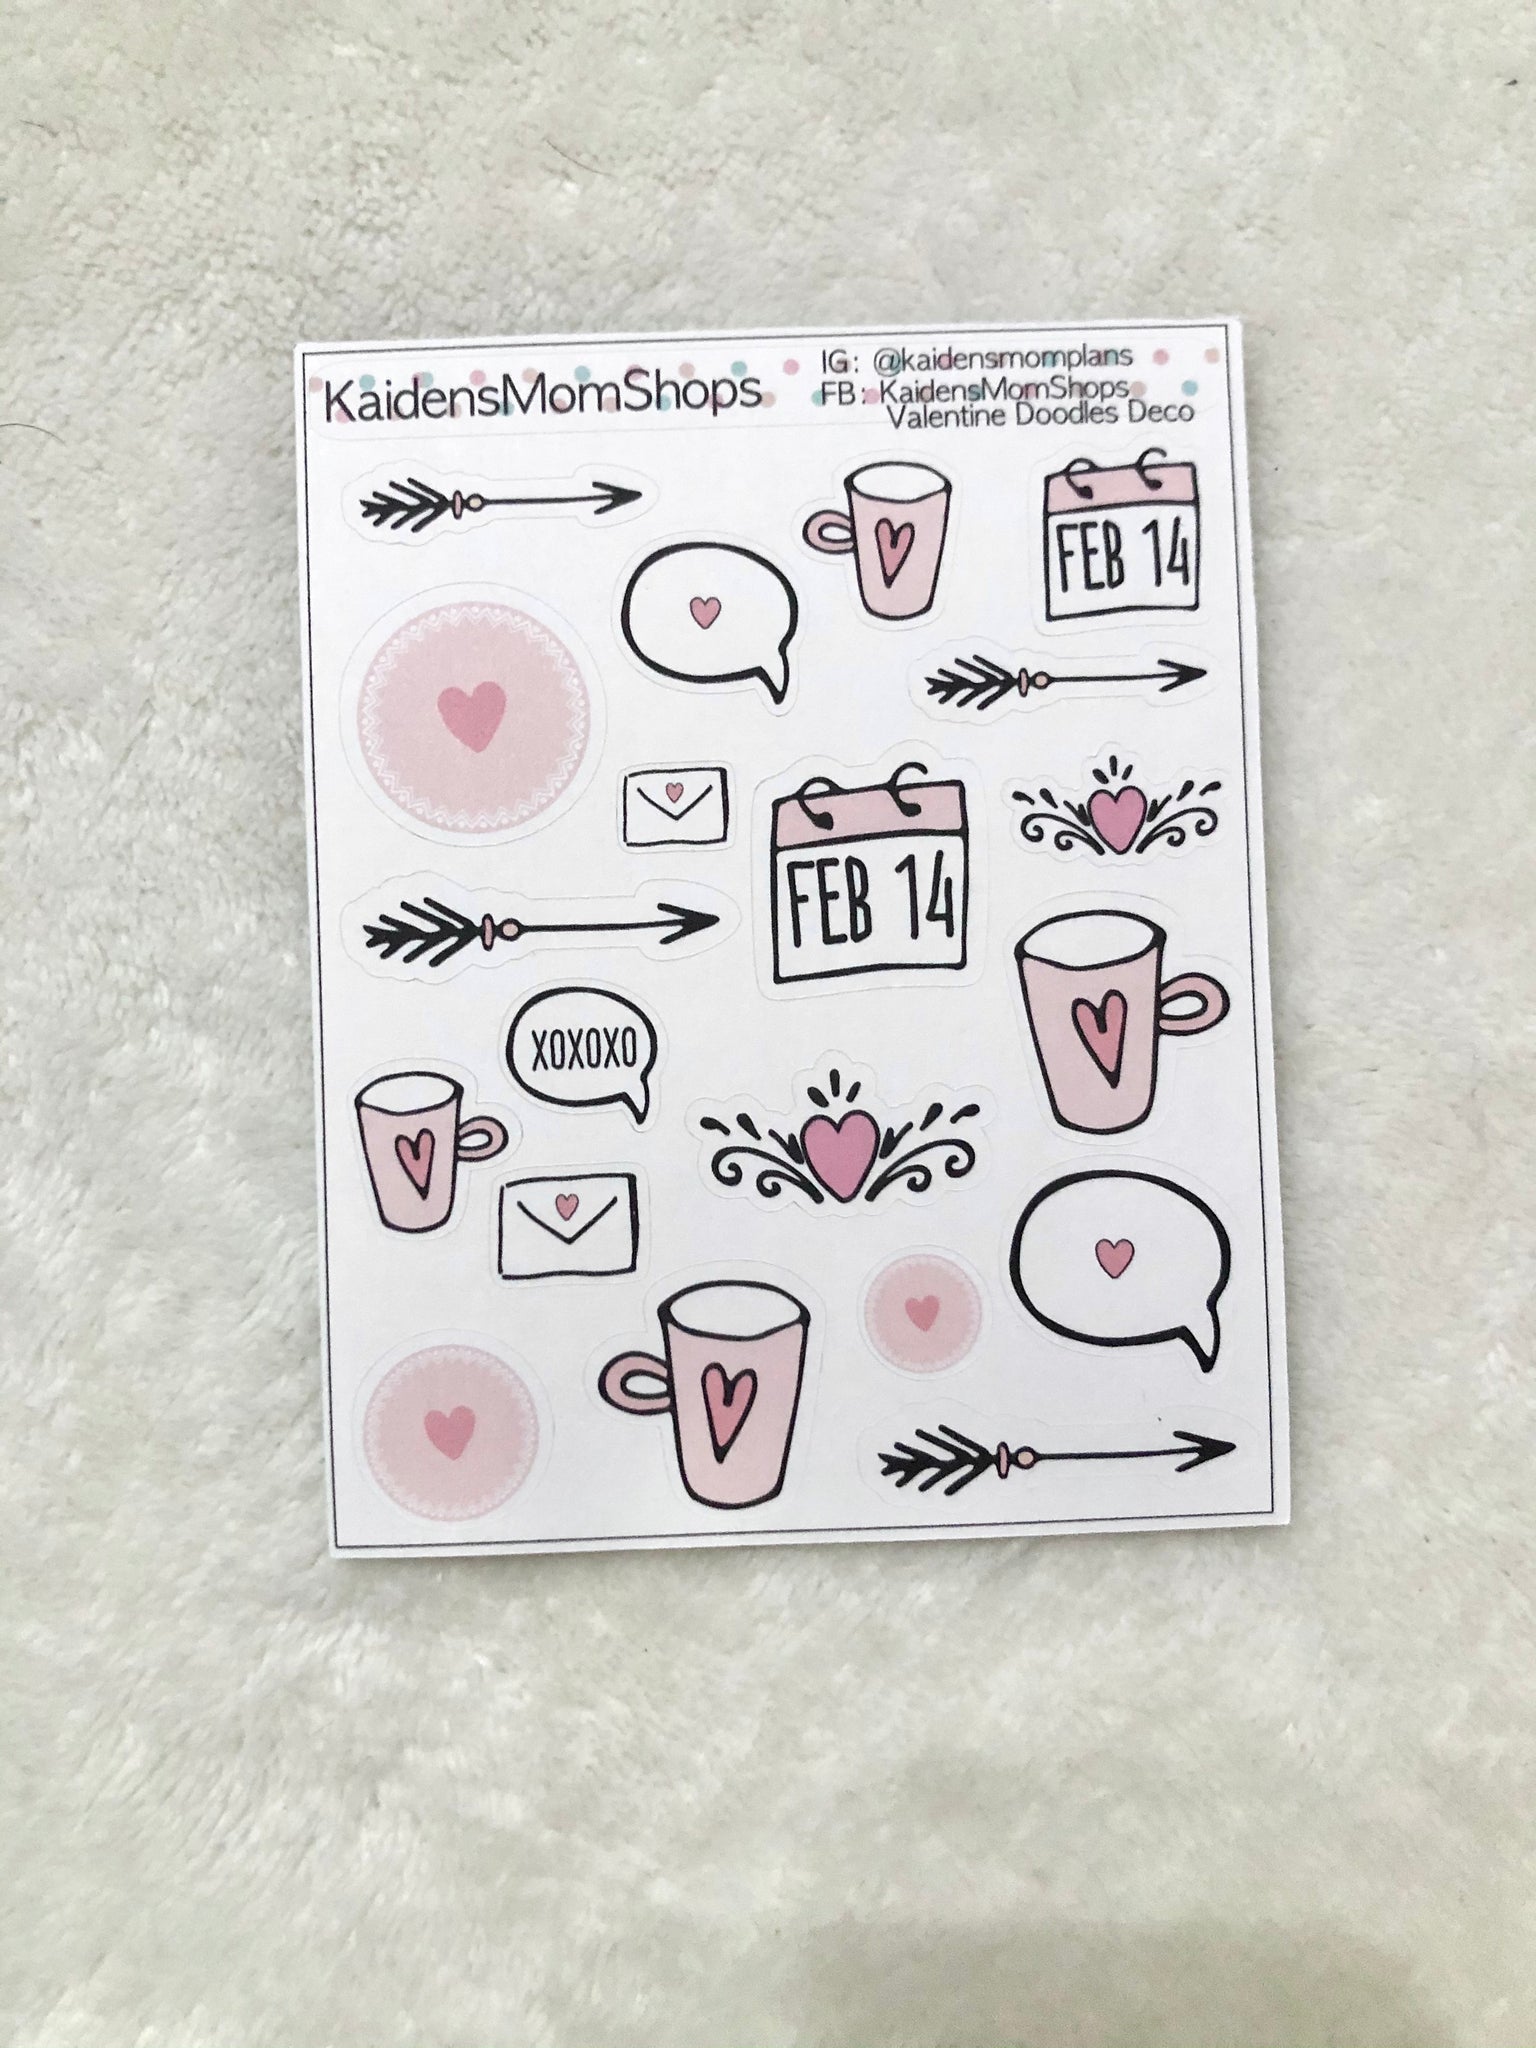 Cute Home Deco Stickers / Diary Journal Doodle Sticker Sheet